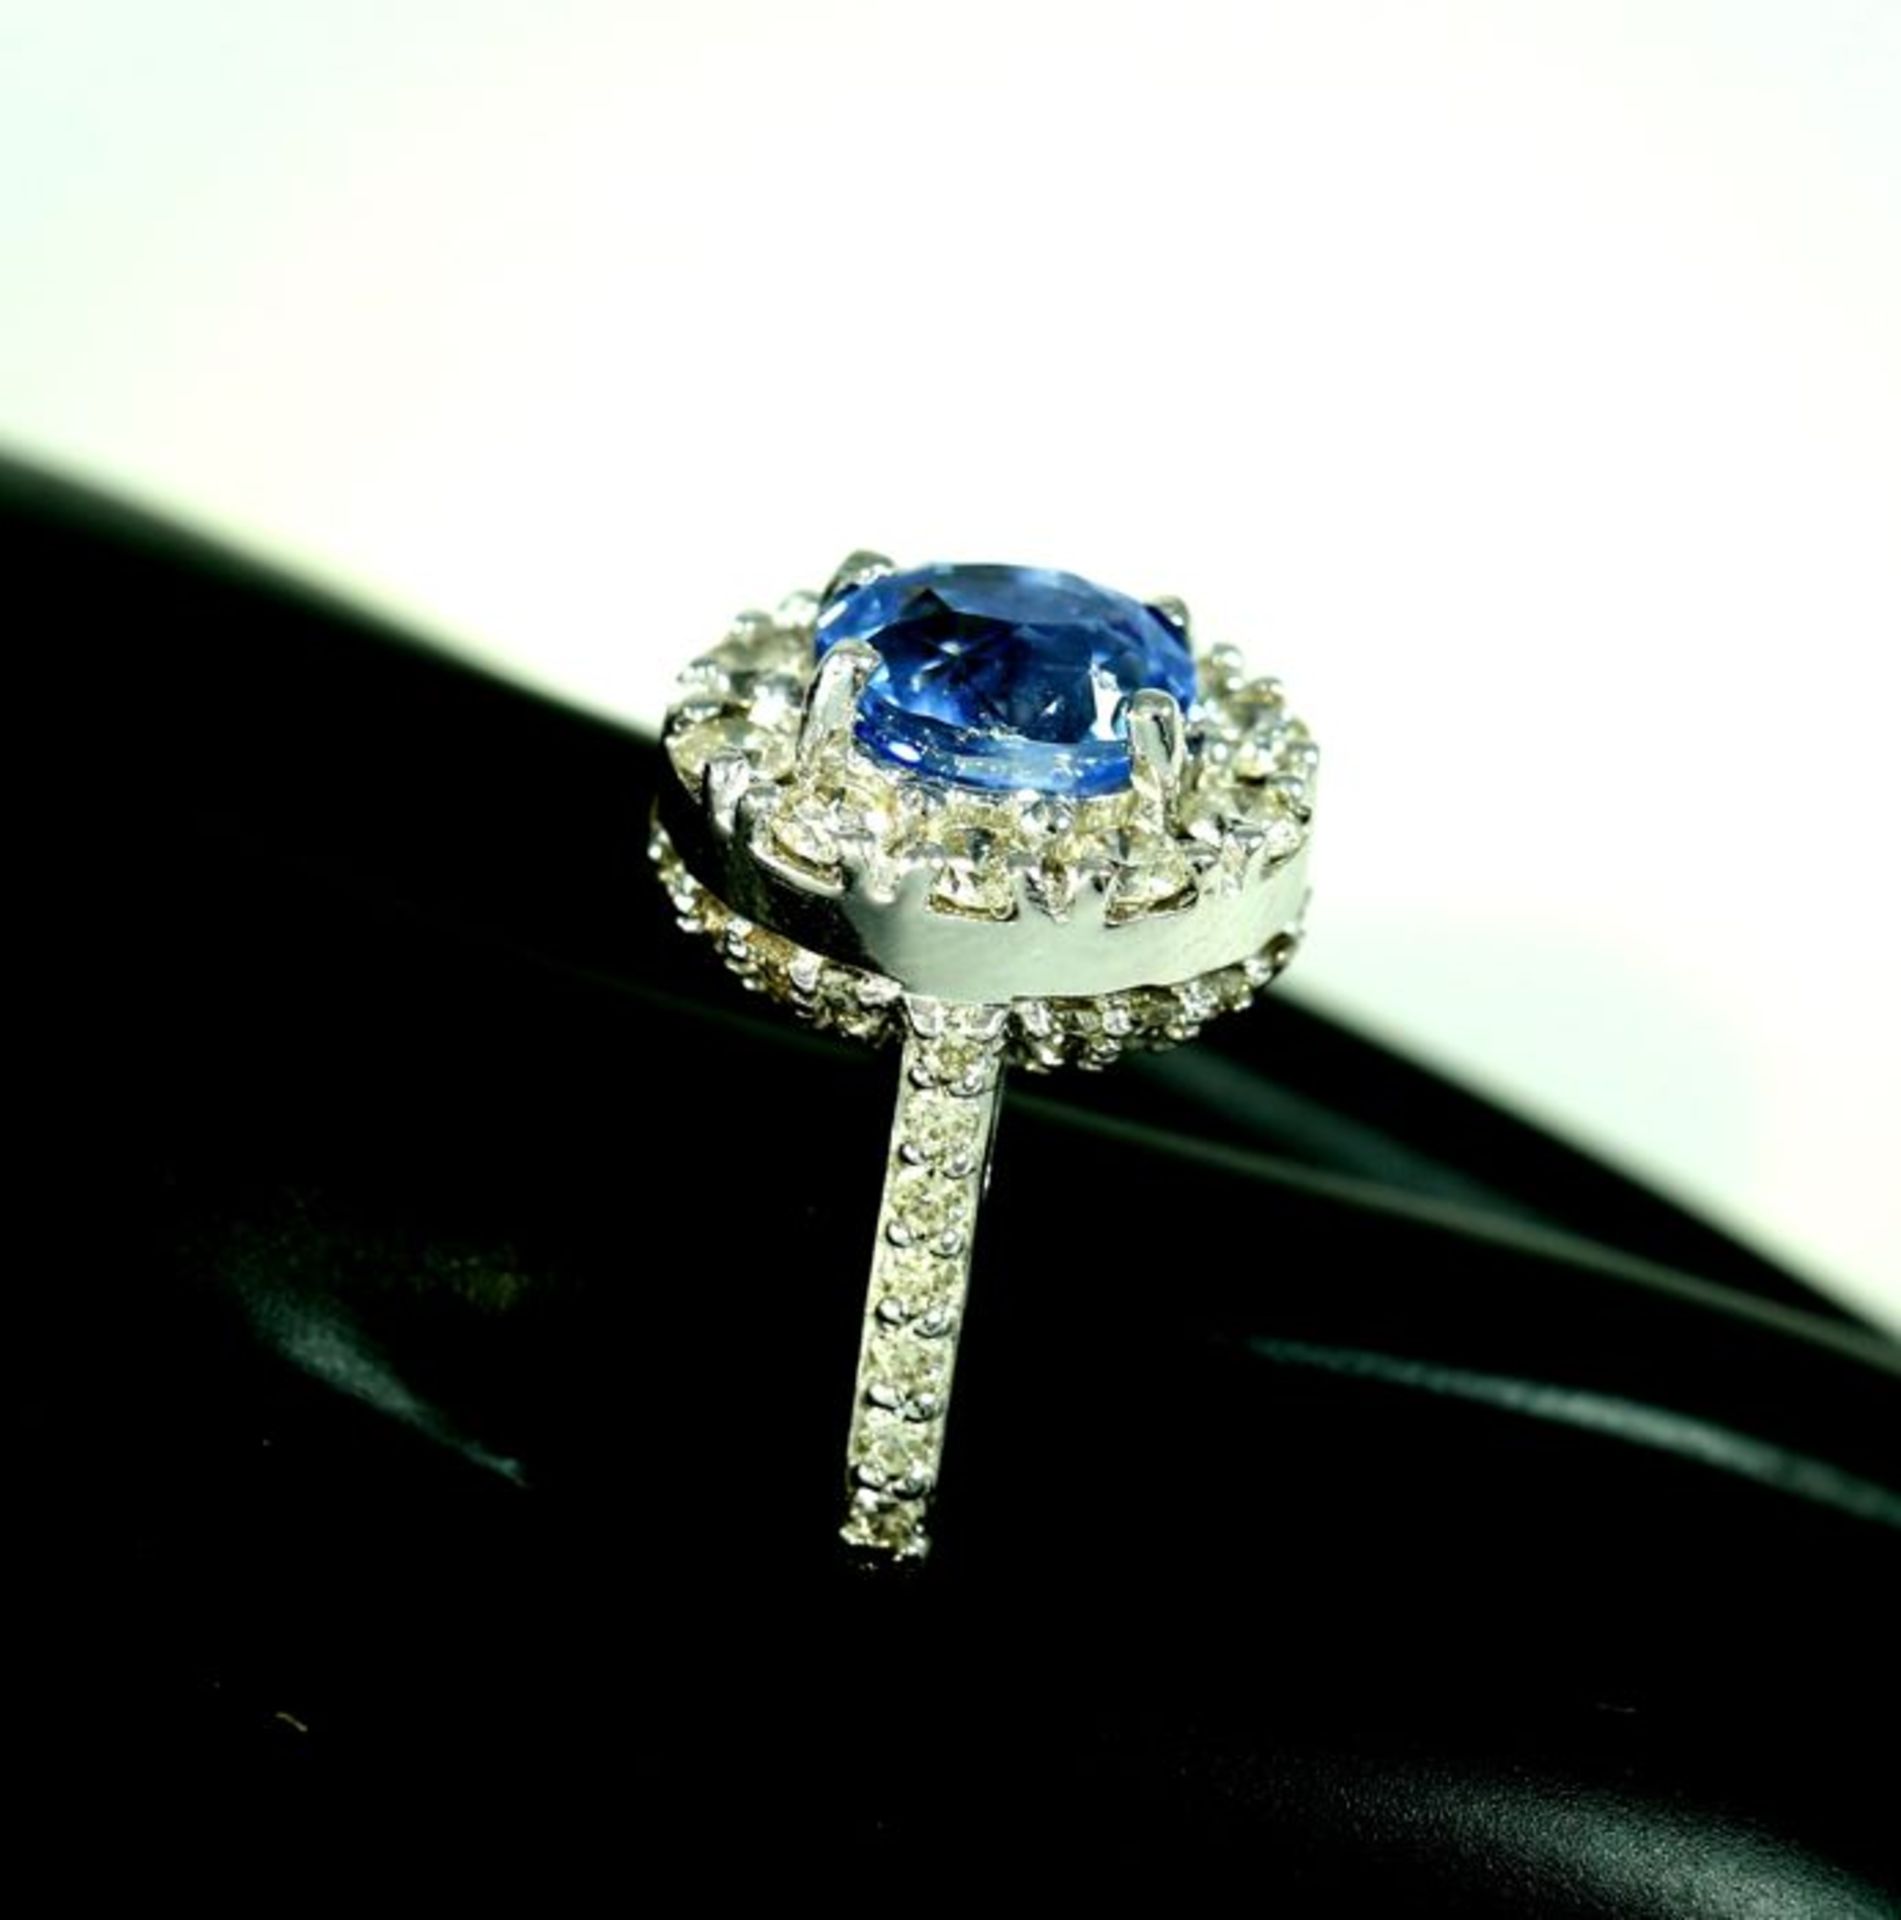 14 K / 585 White Gold Blue Sapphire (IGI certified) and Diamond Ring - Image 9 of 10